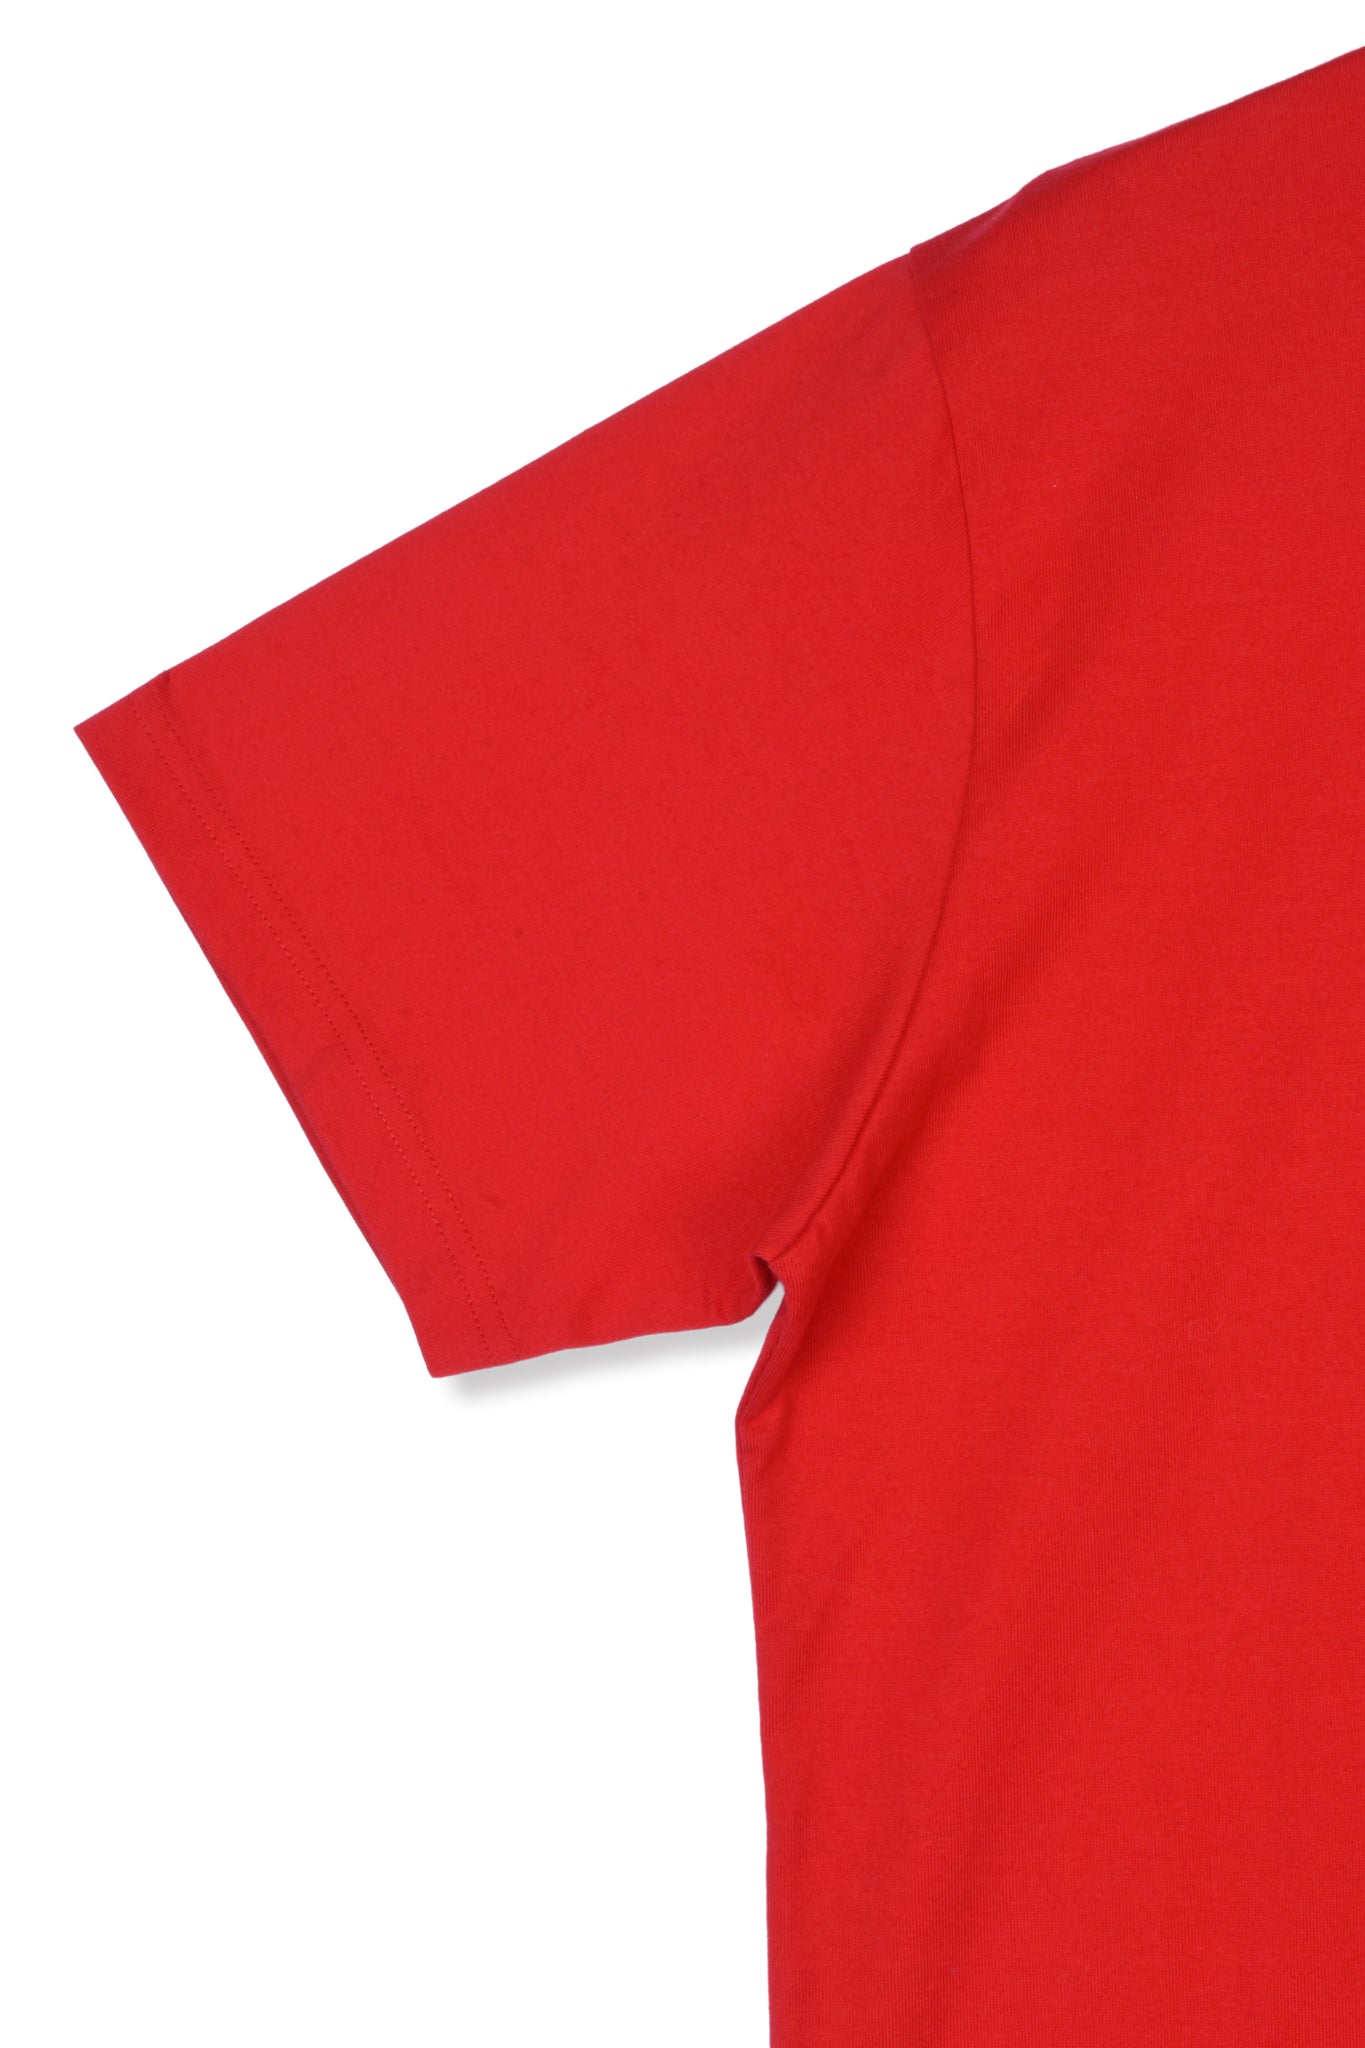 STATEMENT PRINTED T-SHIRT/RED